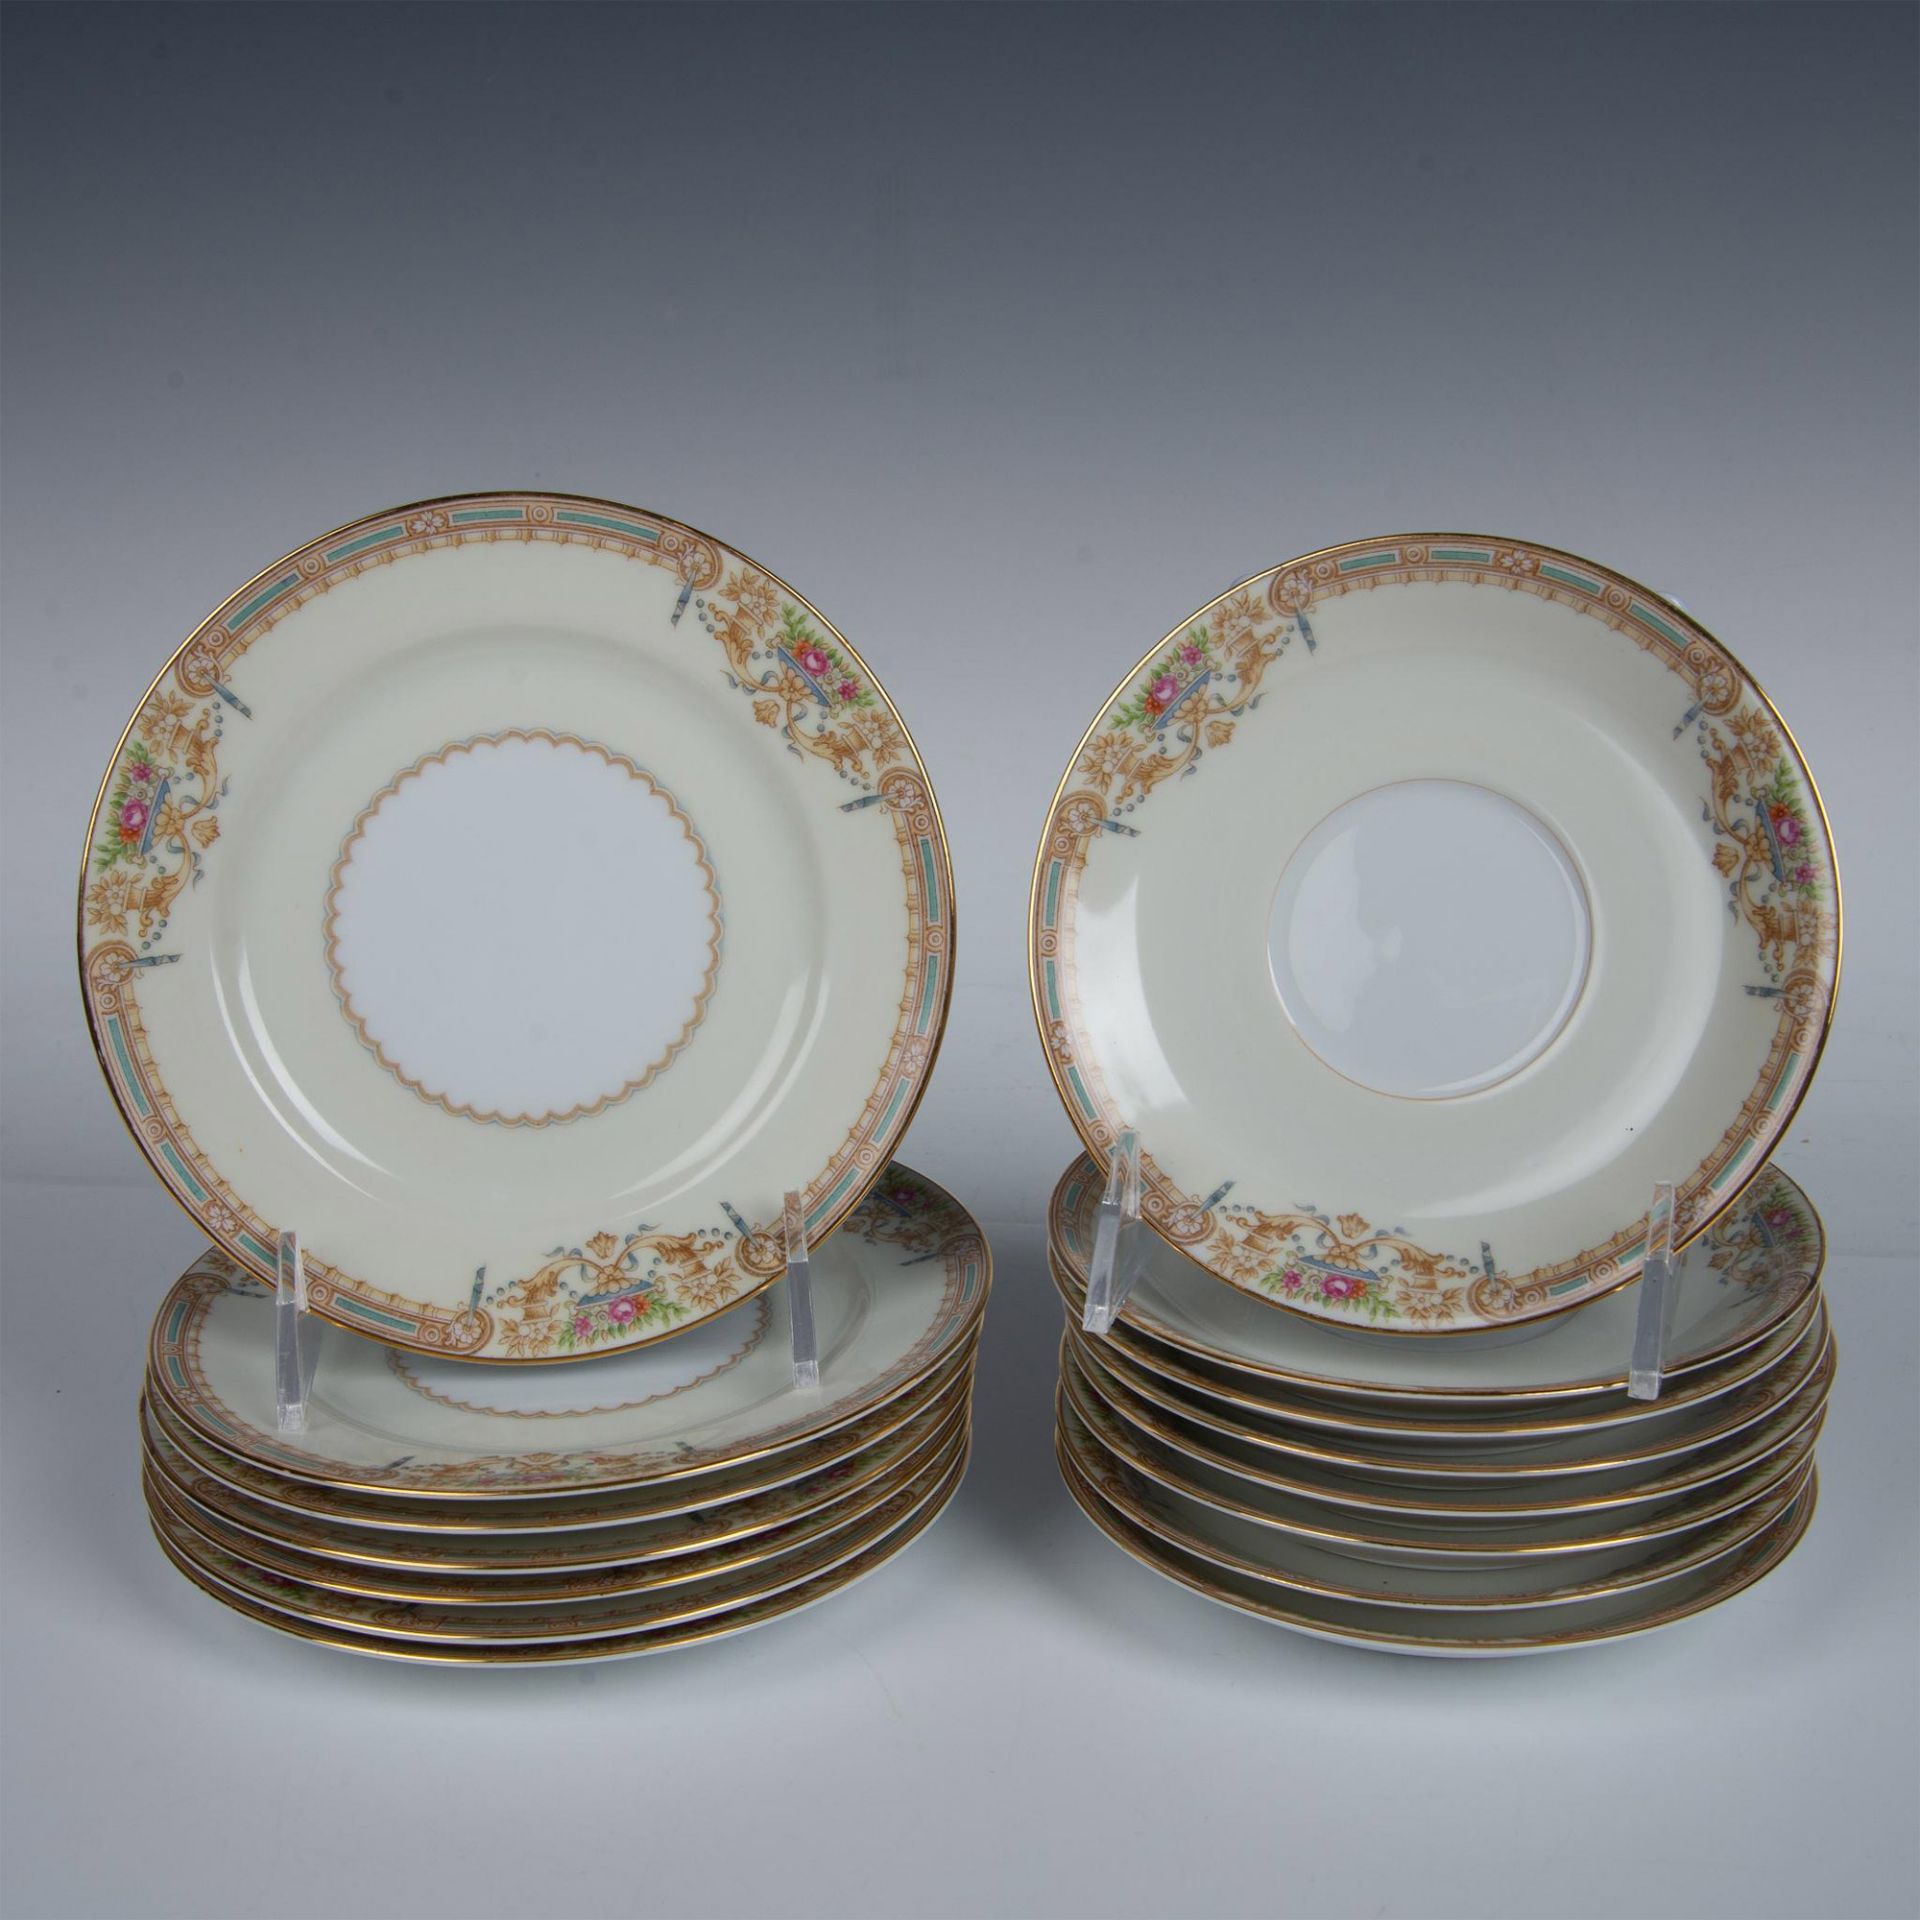 55 pc Vintage Noritake China Dinner Service for 8, Sonora - Image 6 of 11